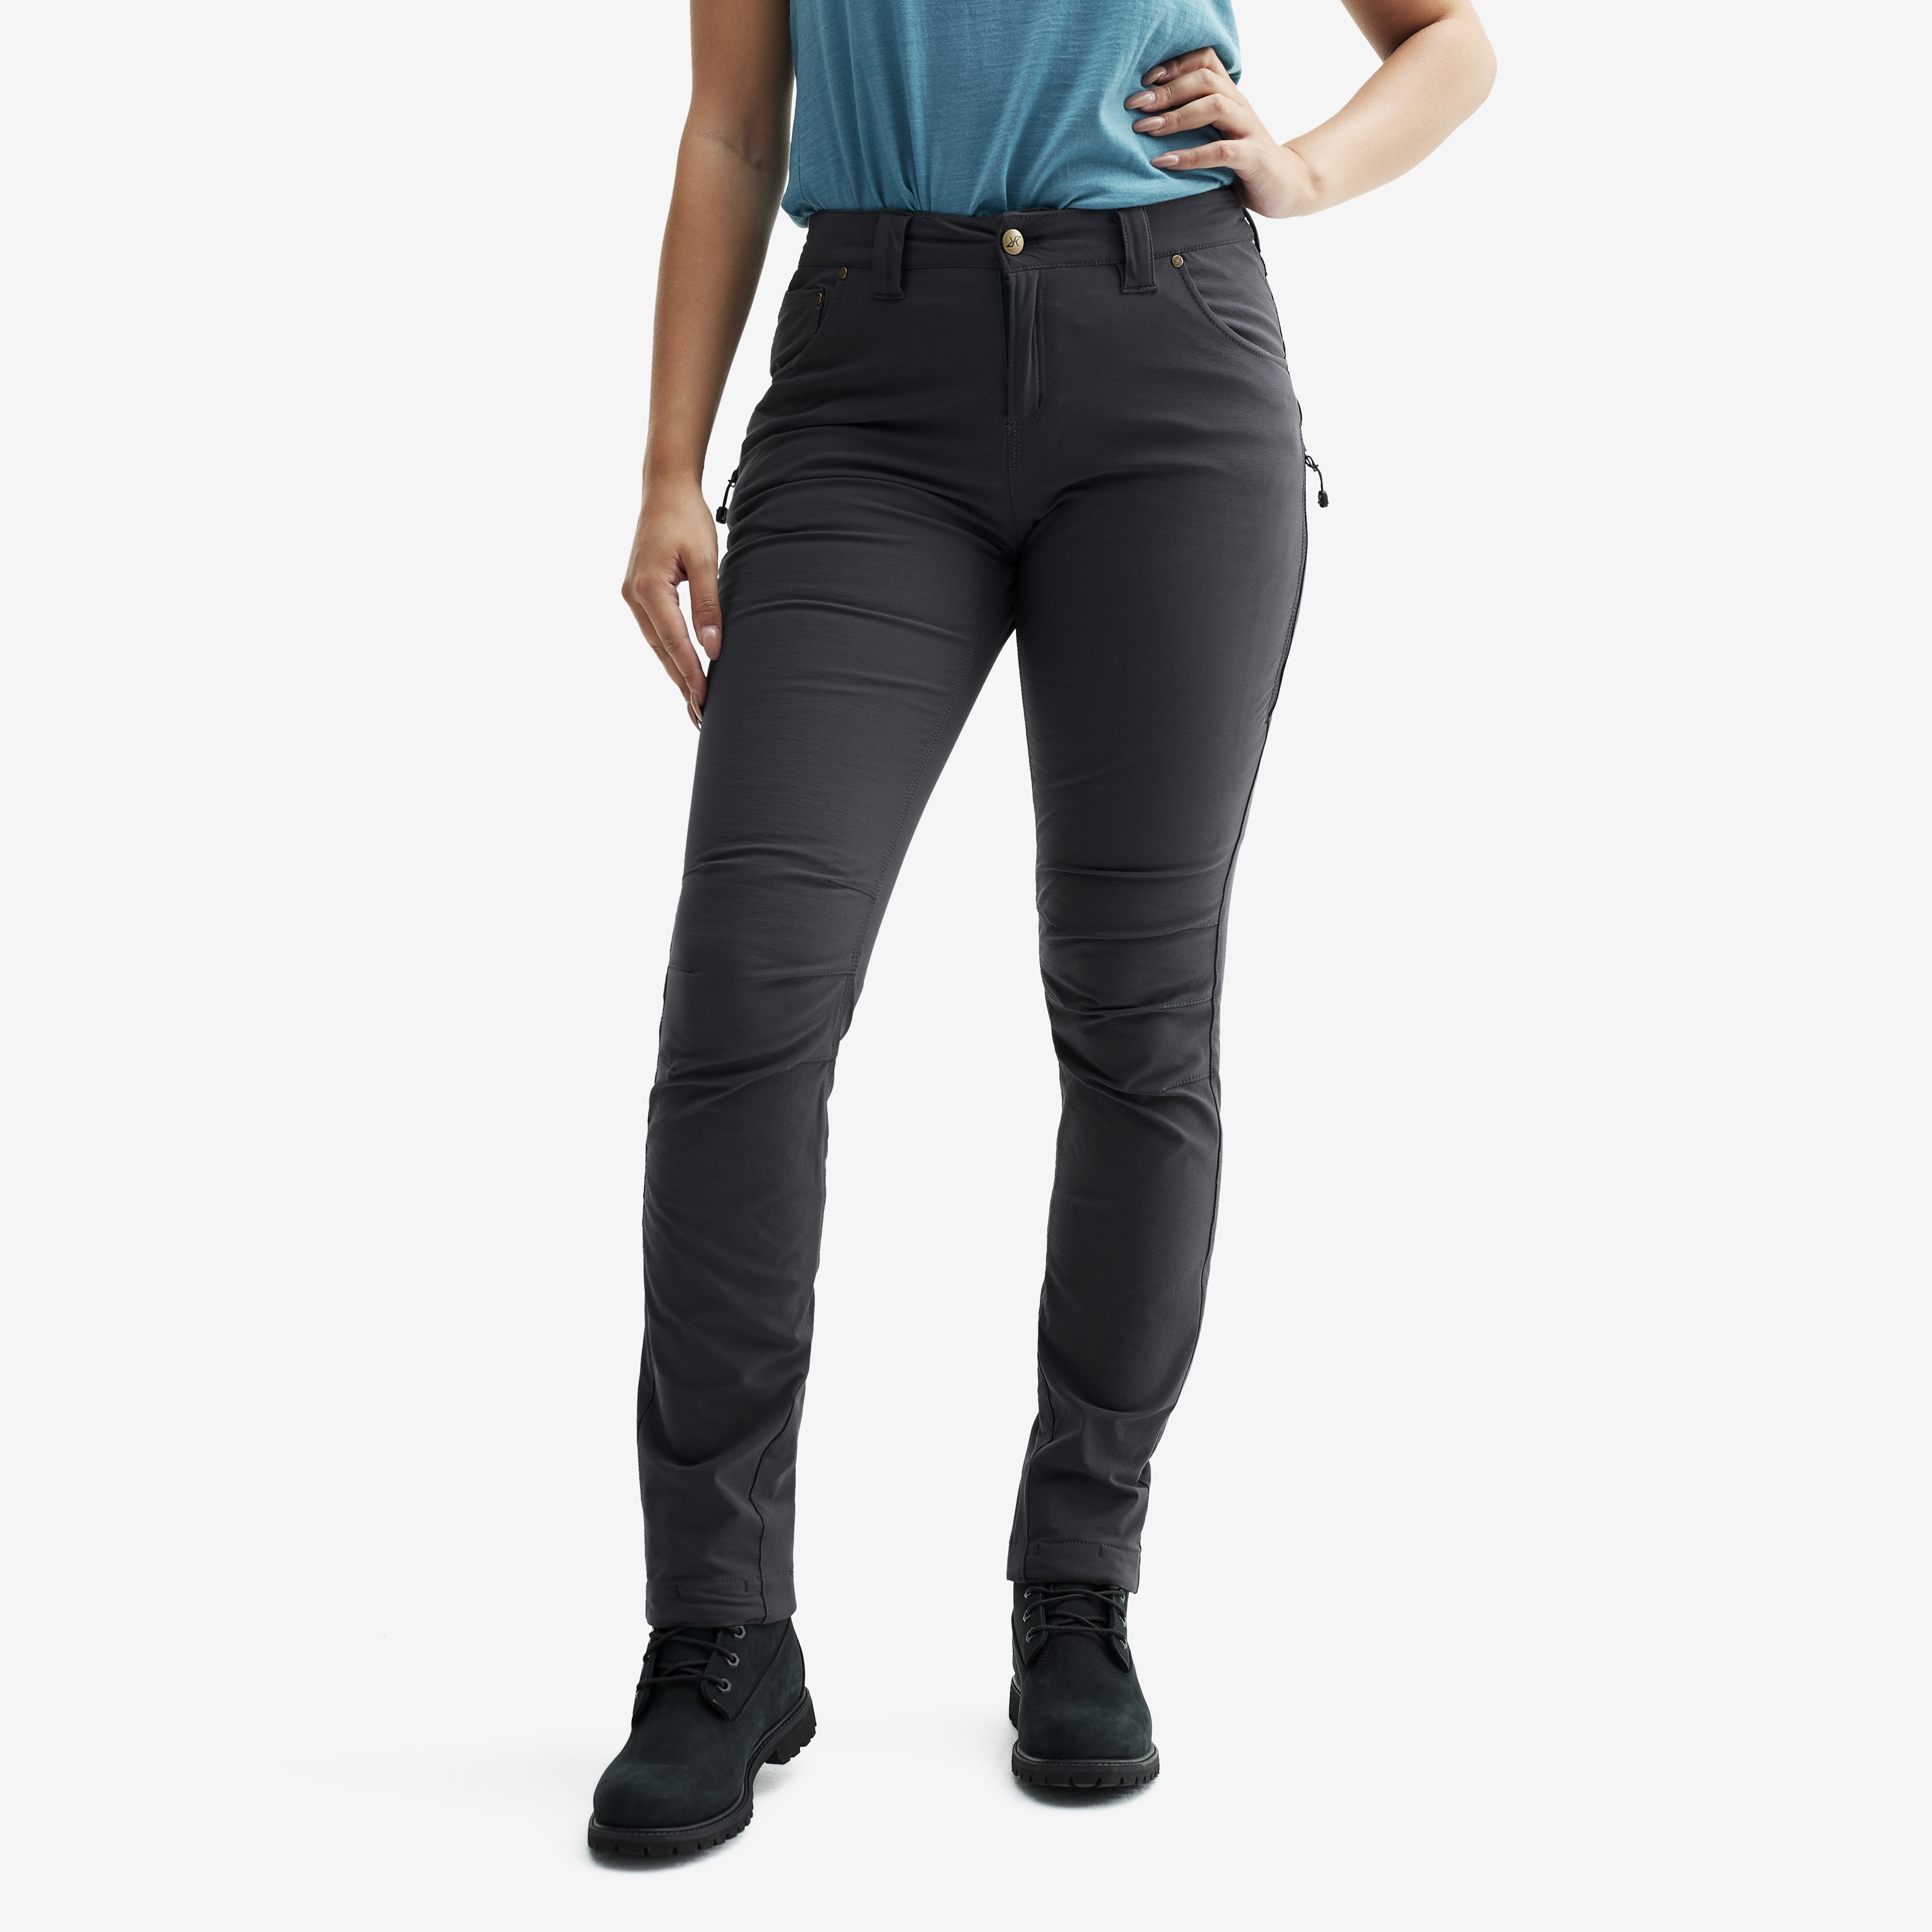 Adrenaline Outdoor Jeans Anthracite Edition Femme